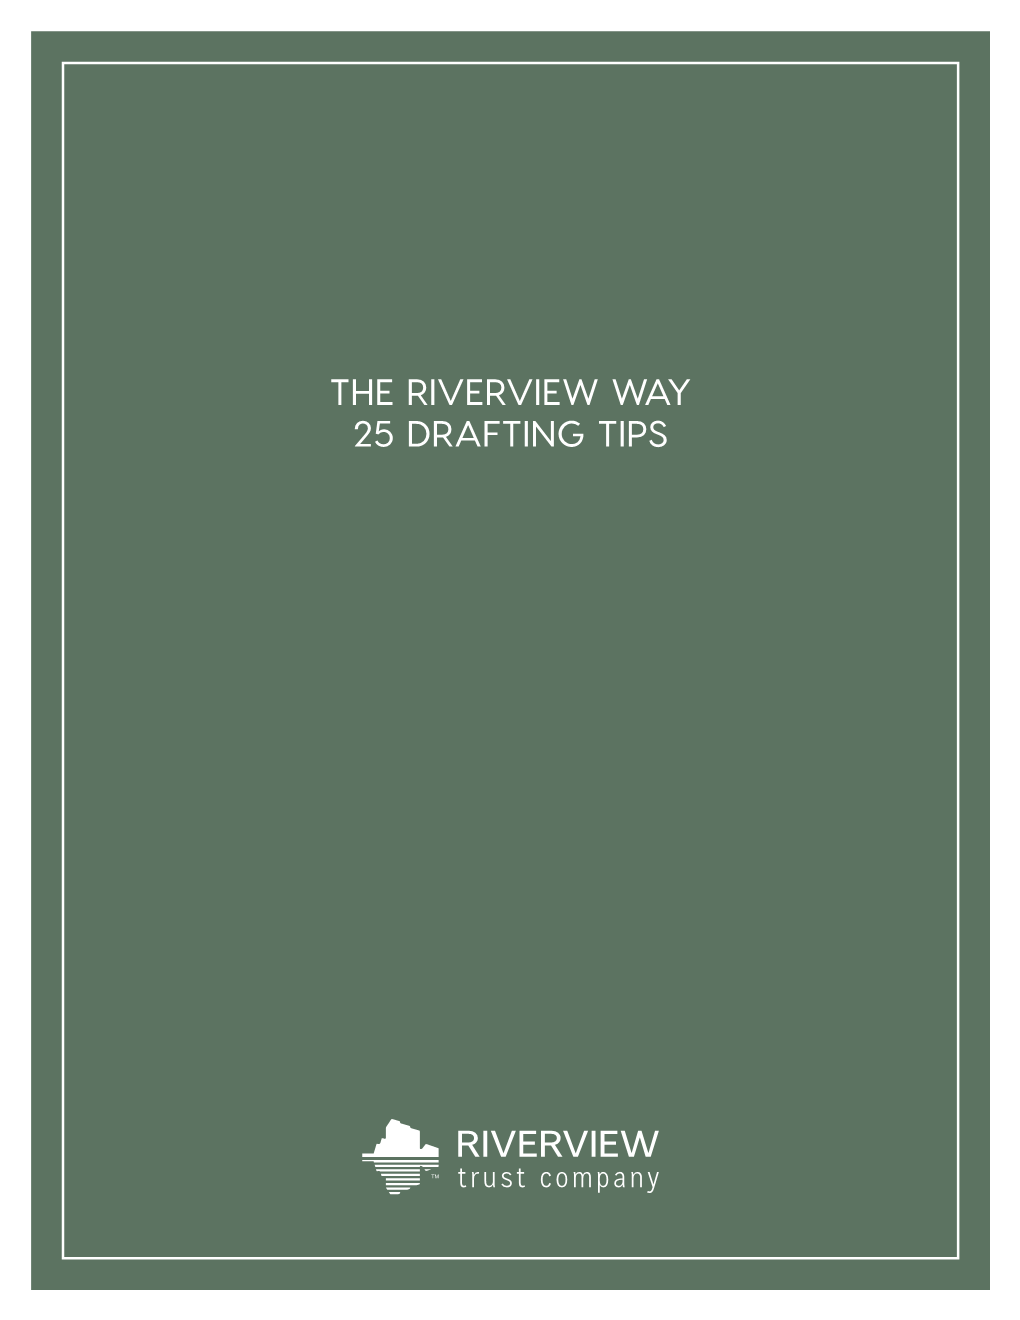 The Riverview Way 25 Drafting Tips